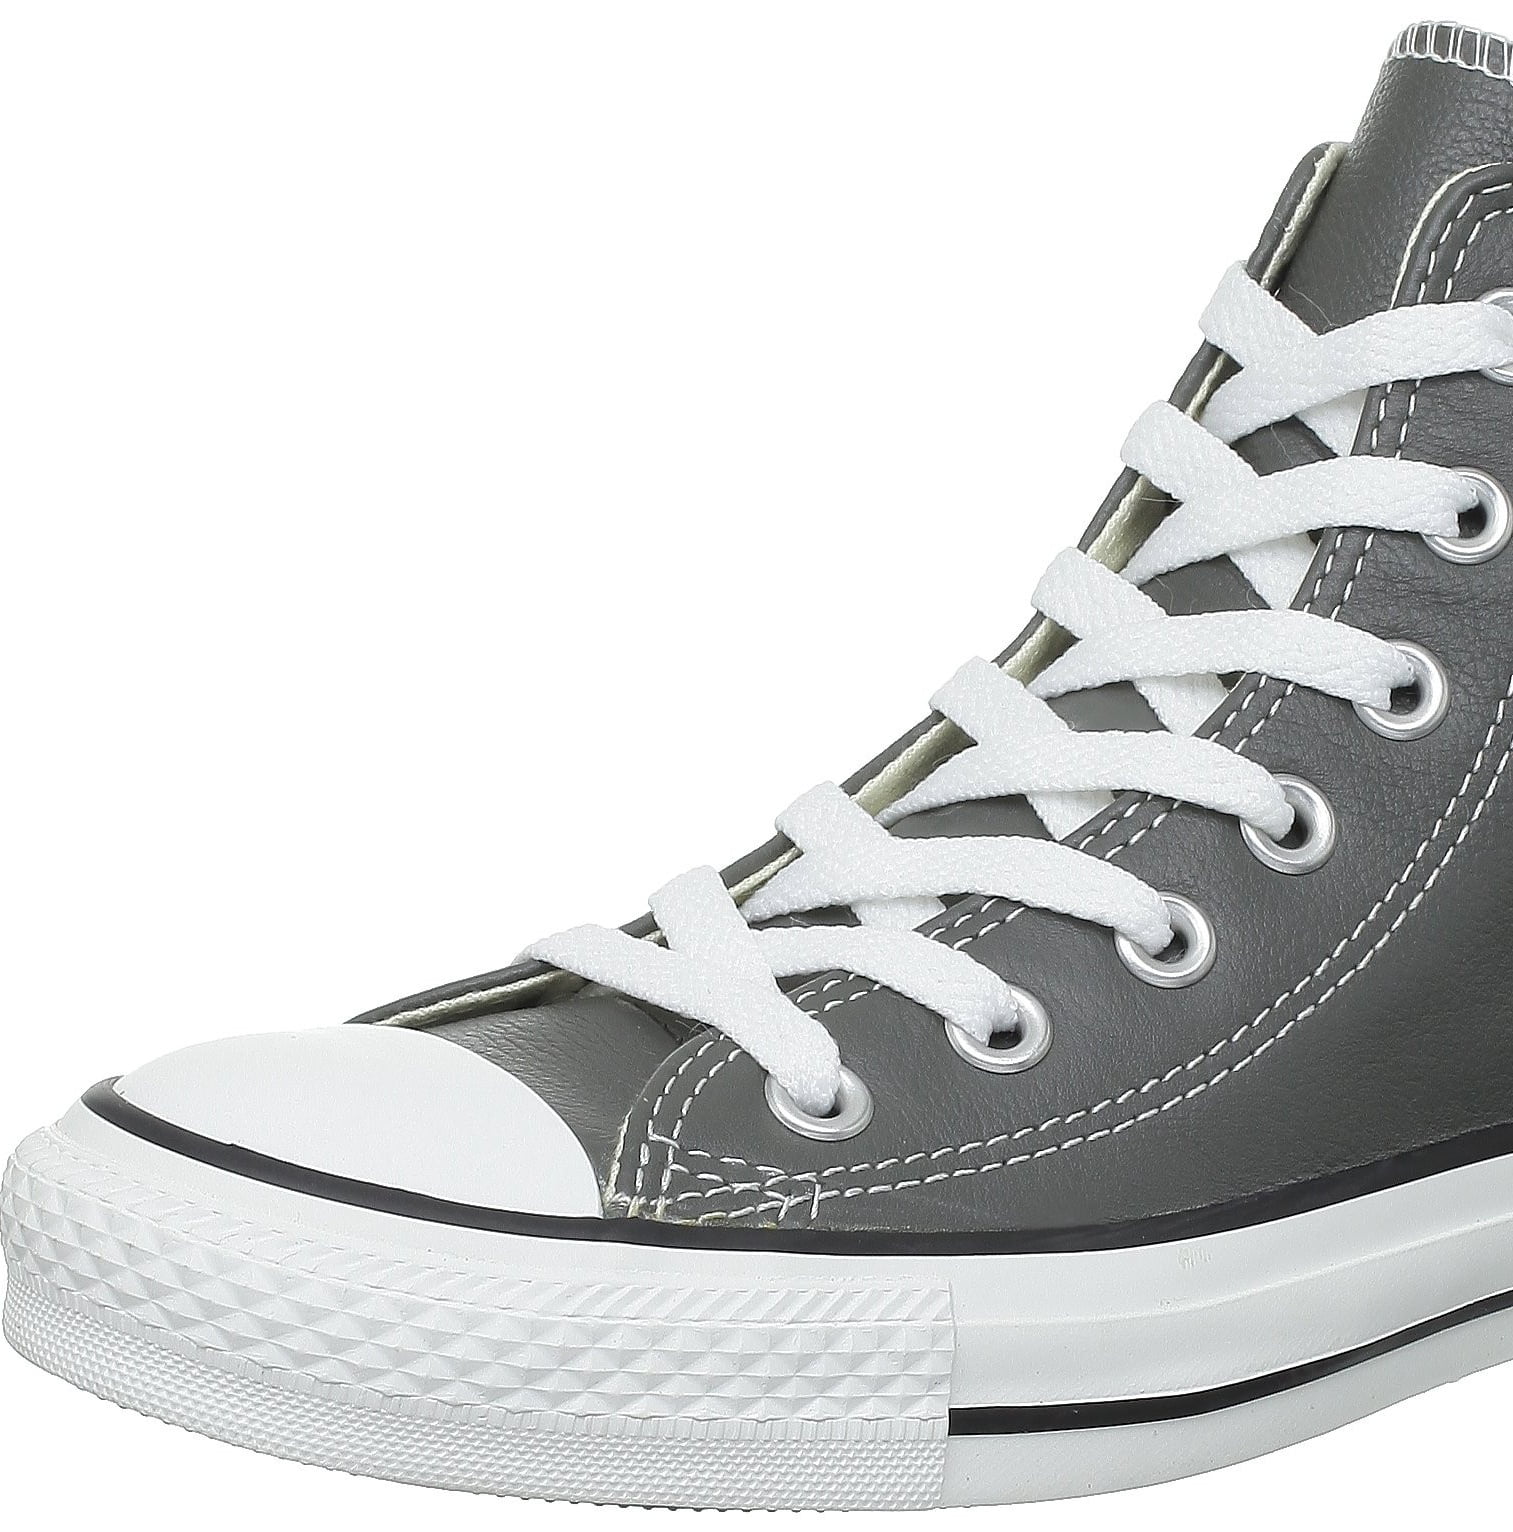 Converse Chuck Taylor All Star Hi Leather Sneakers Charcoal -